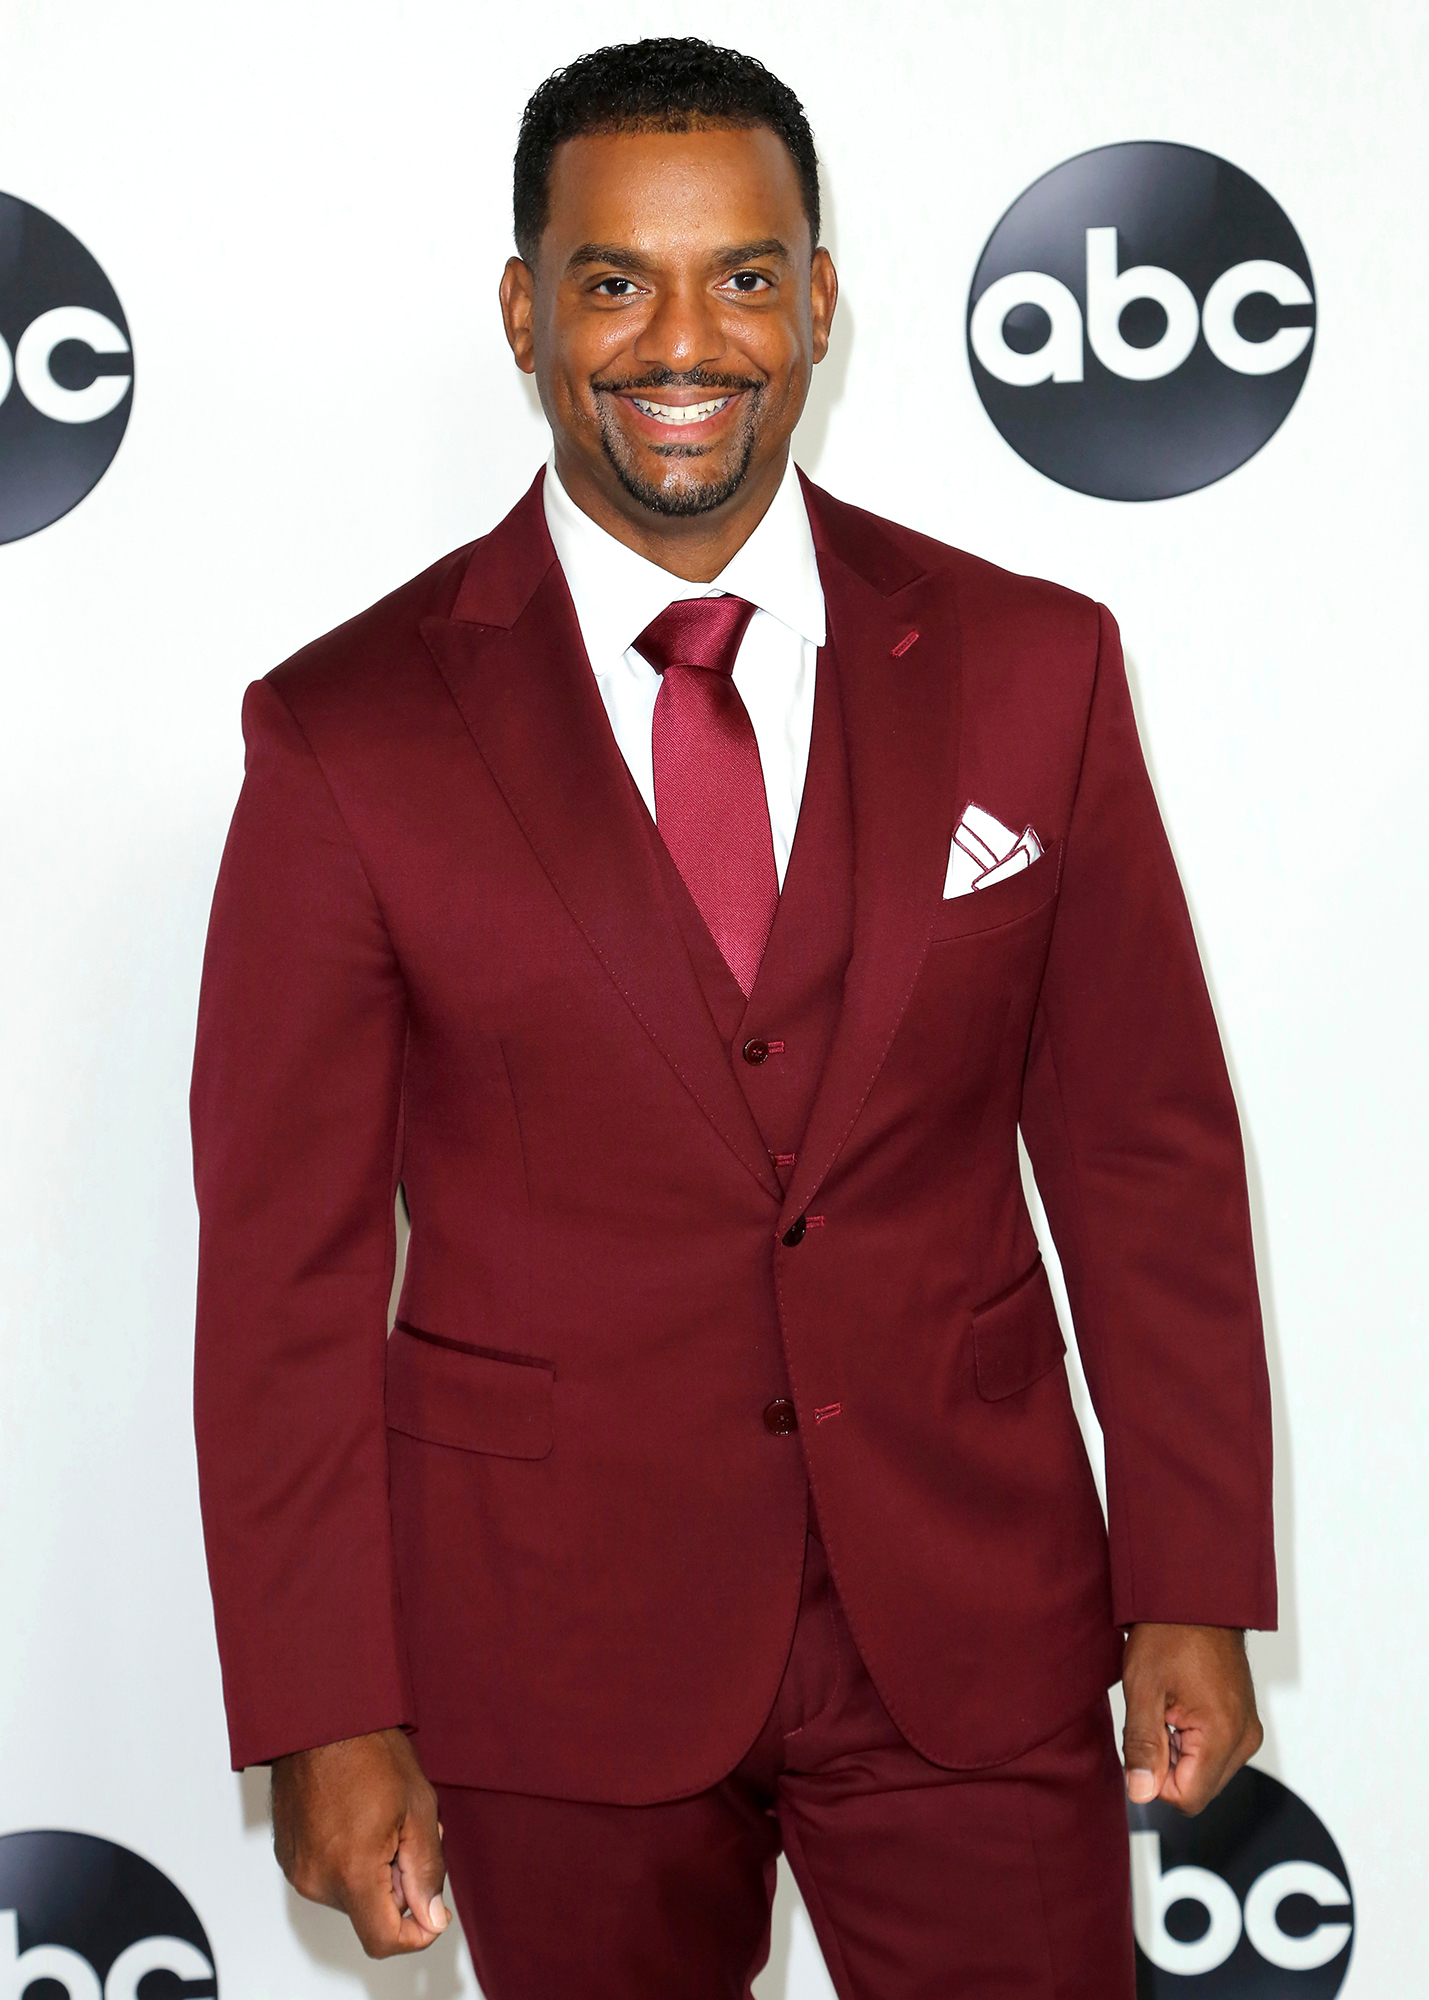 'Dancing With the Stars' Cast Reacts to Alfonso Ribeiro Joining Season 31 As Cohost: 'So Freaking Amazing'